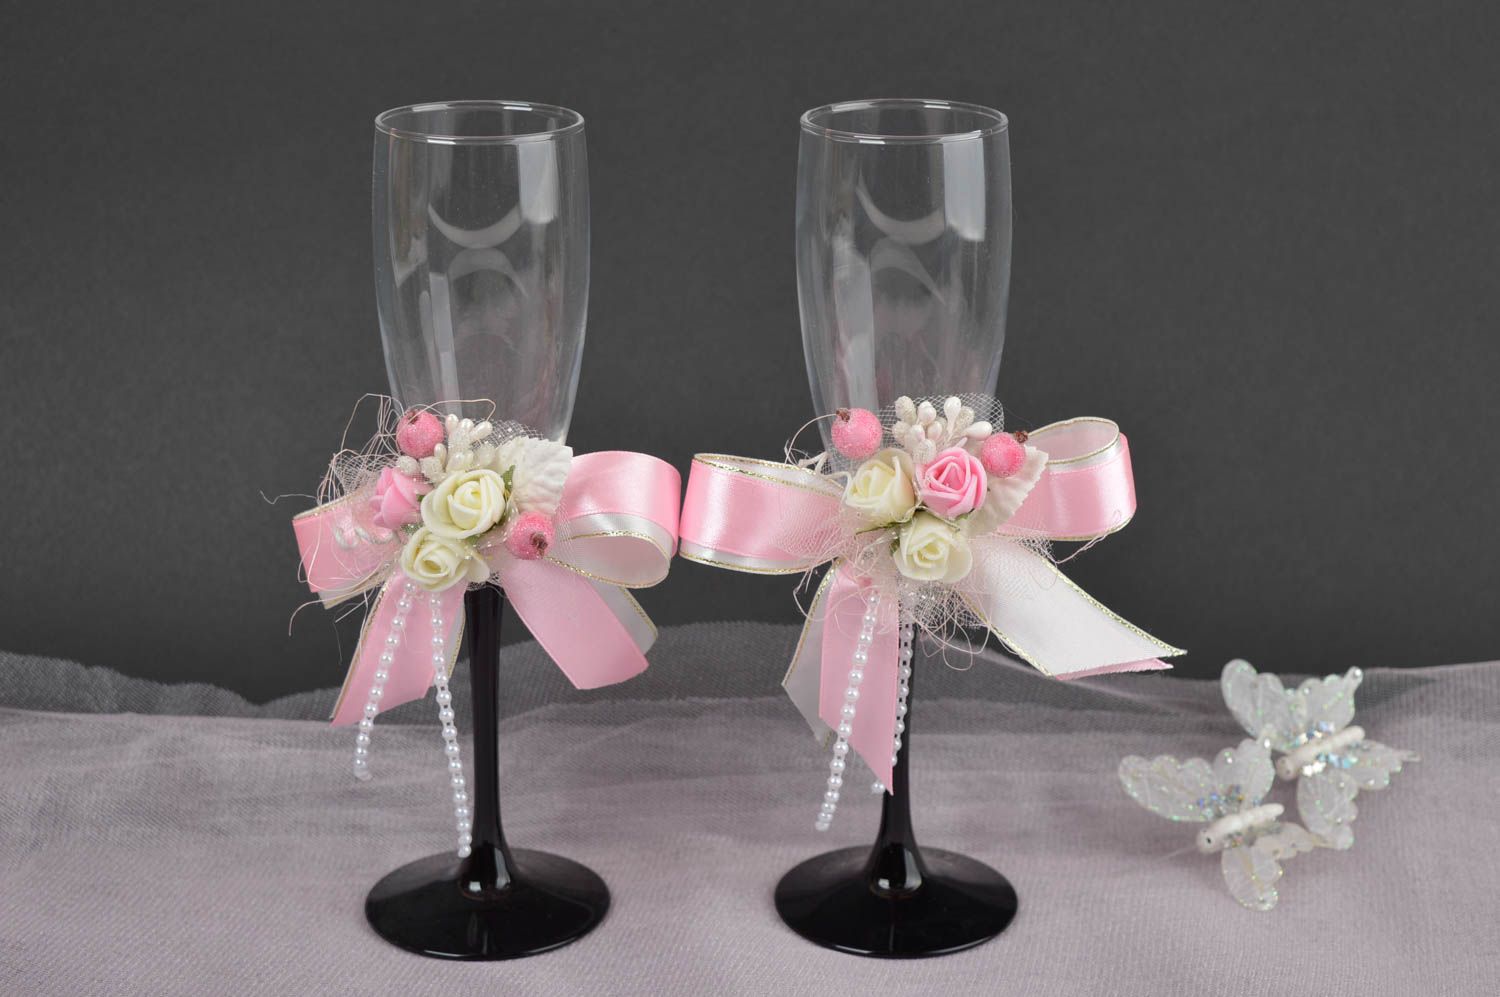 Handmade glasses for wedding champagne glasses for wedding accessories photo 1